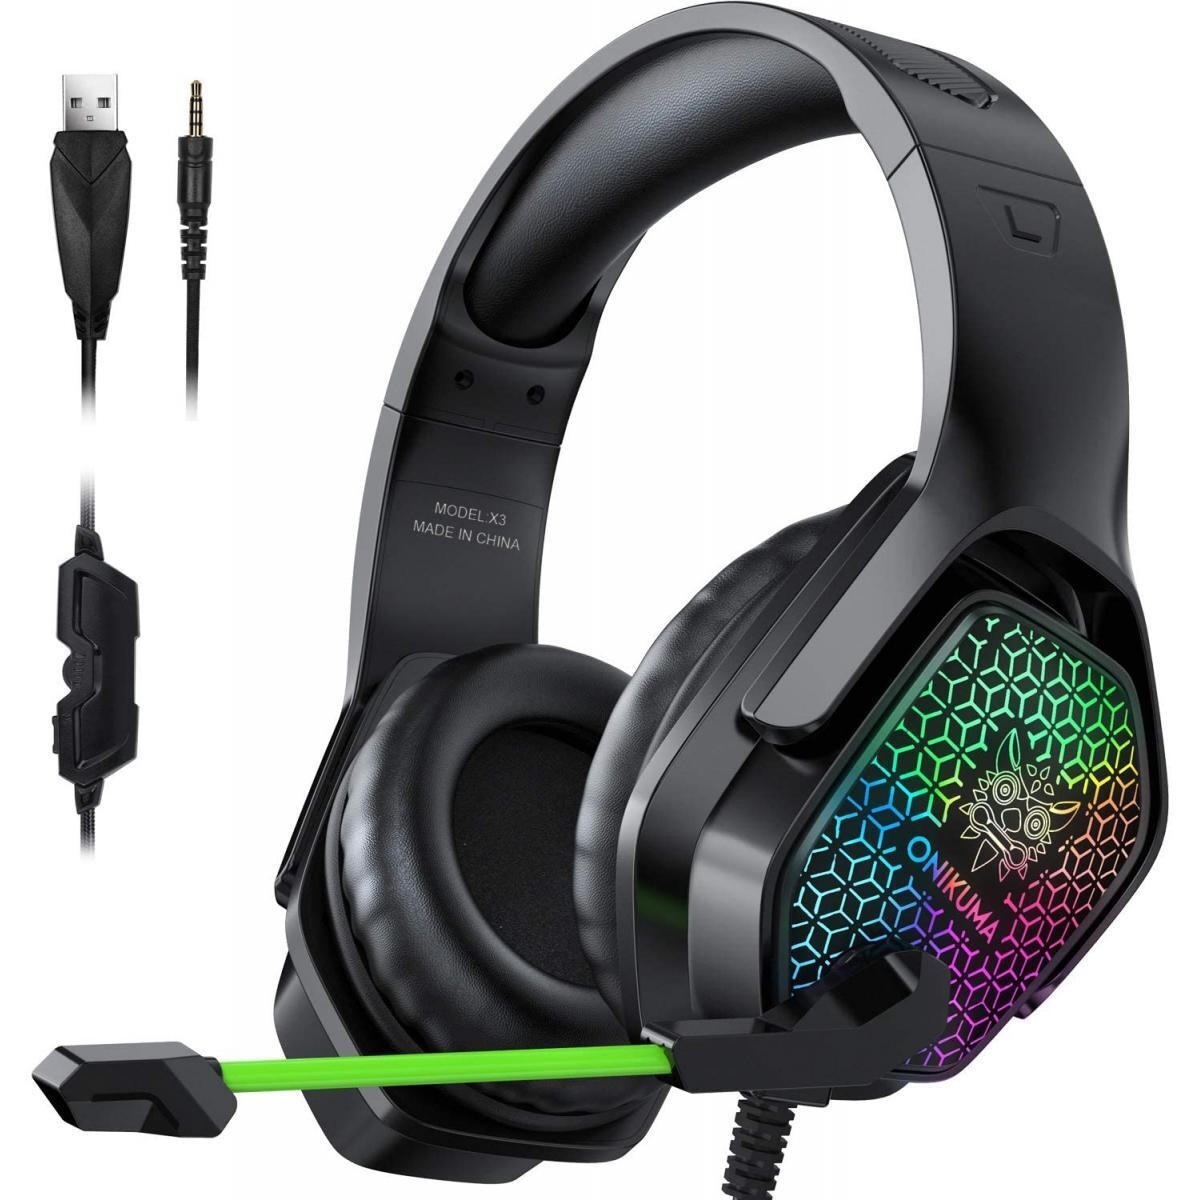 Professional Gaming Headset With Mic - Wired Headphones With Flashing LED  Lights